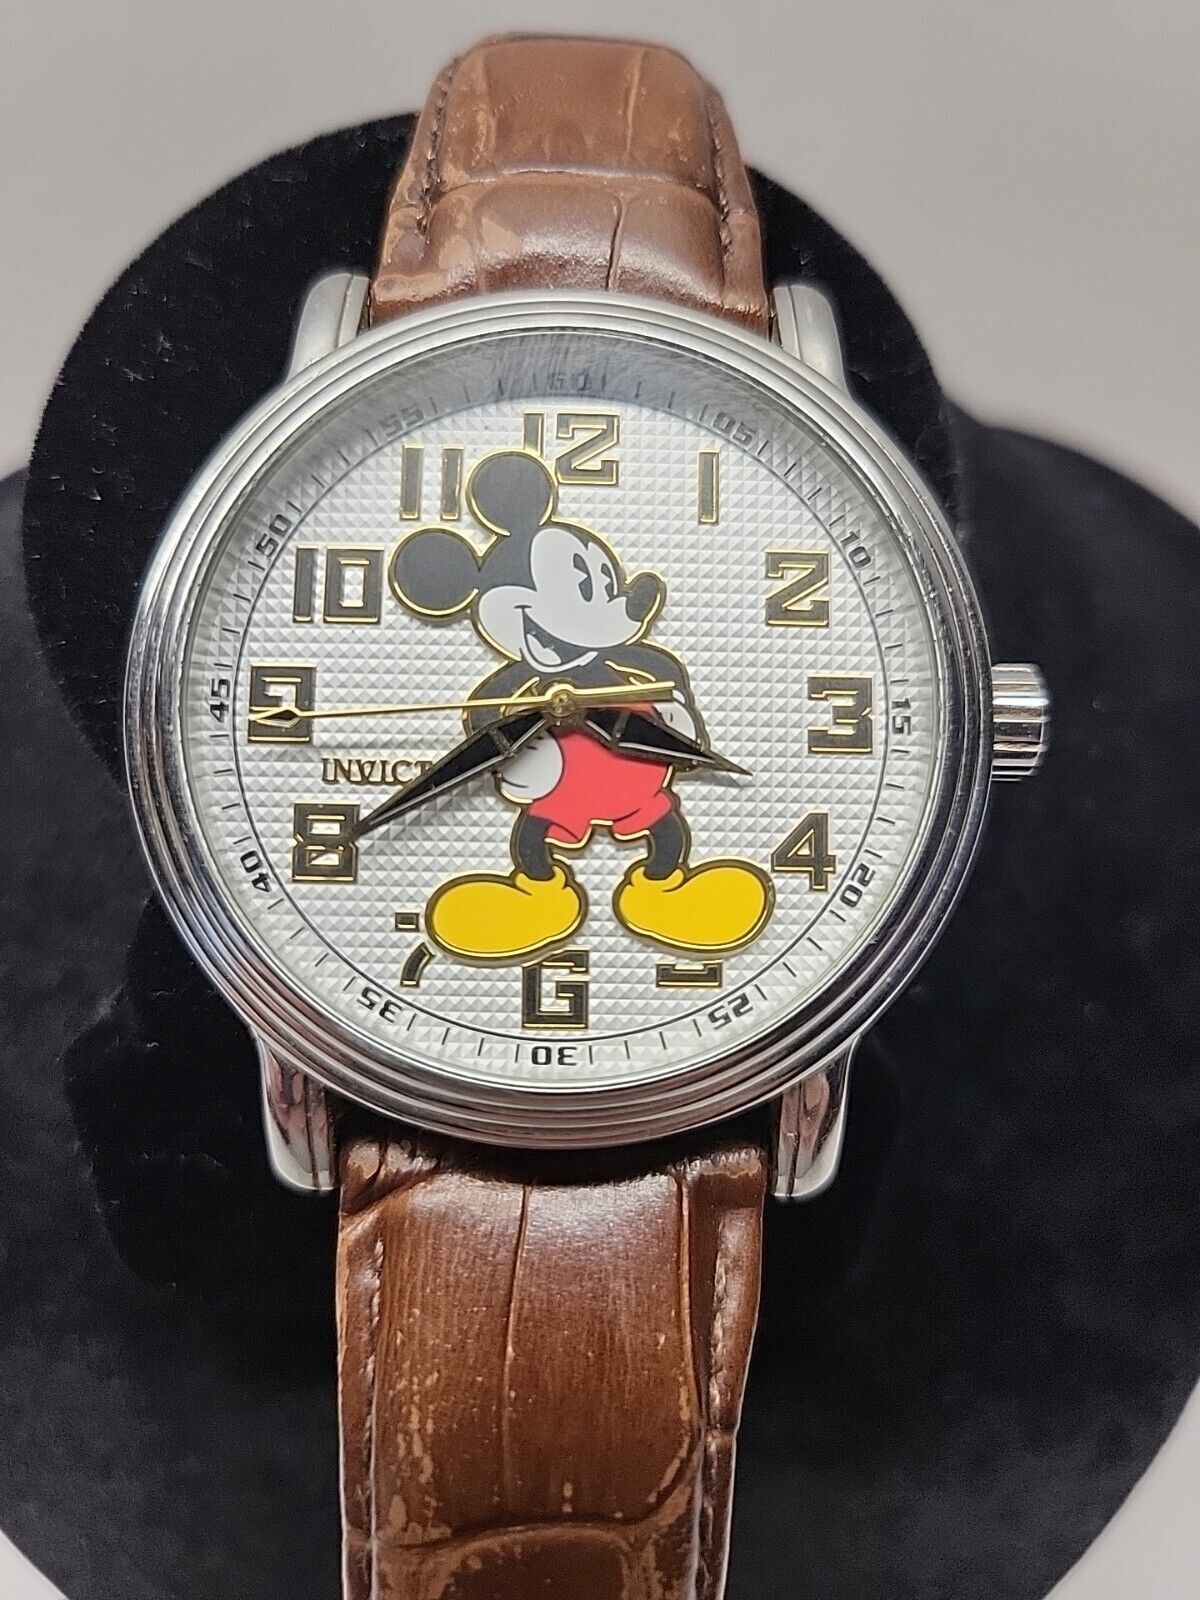 Invicta RARE Limited Edition Mickey Mouse Watch - 32mm #0968/5000 Model 2454